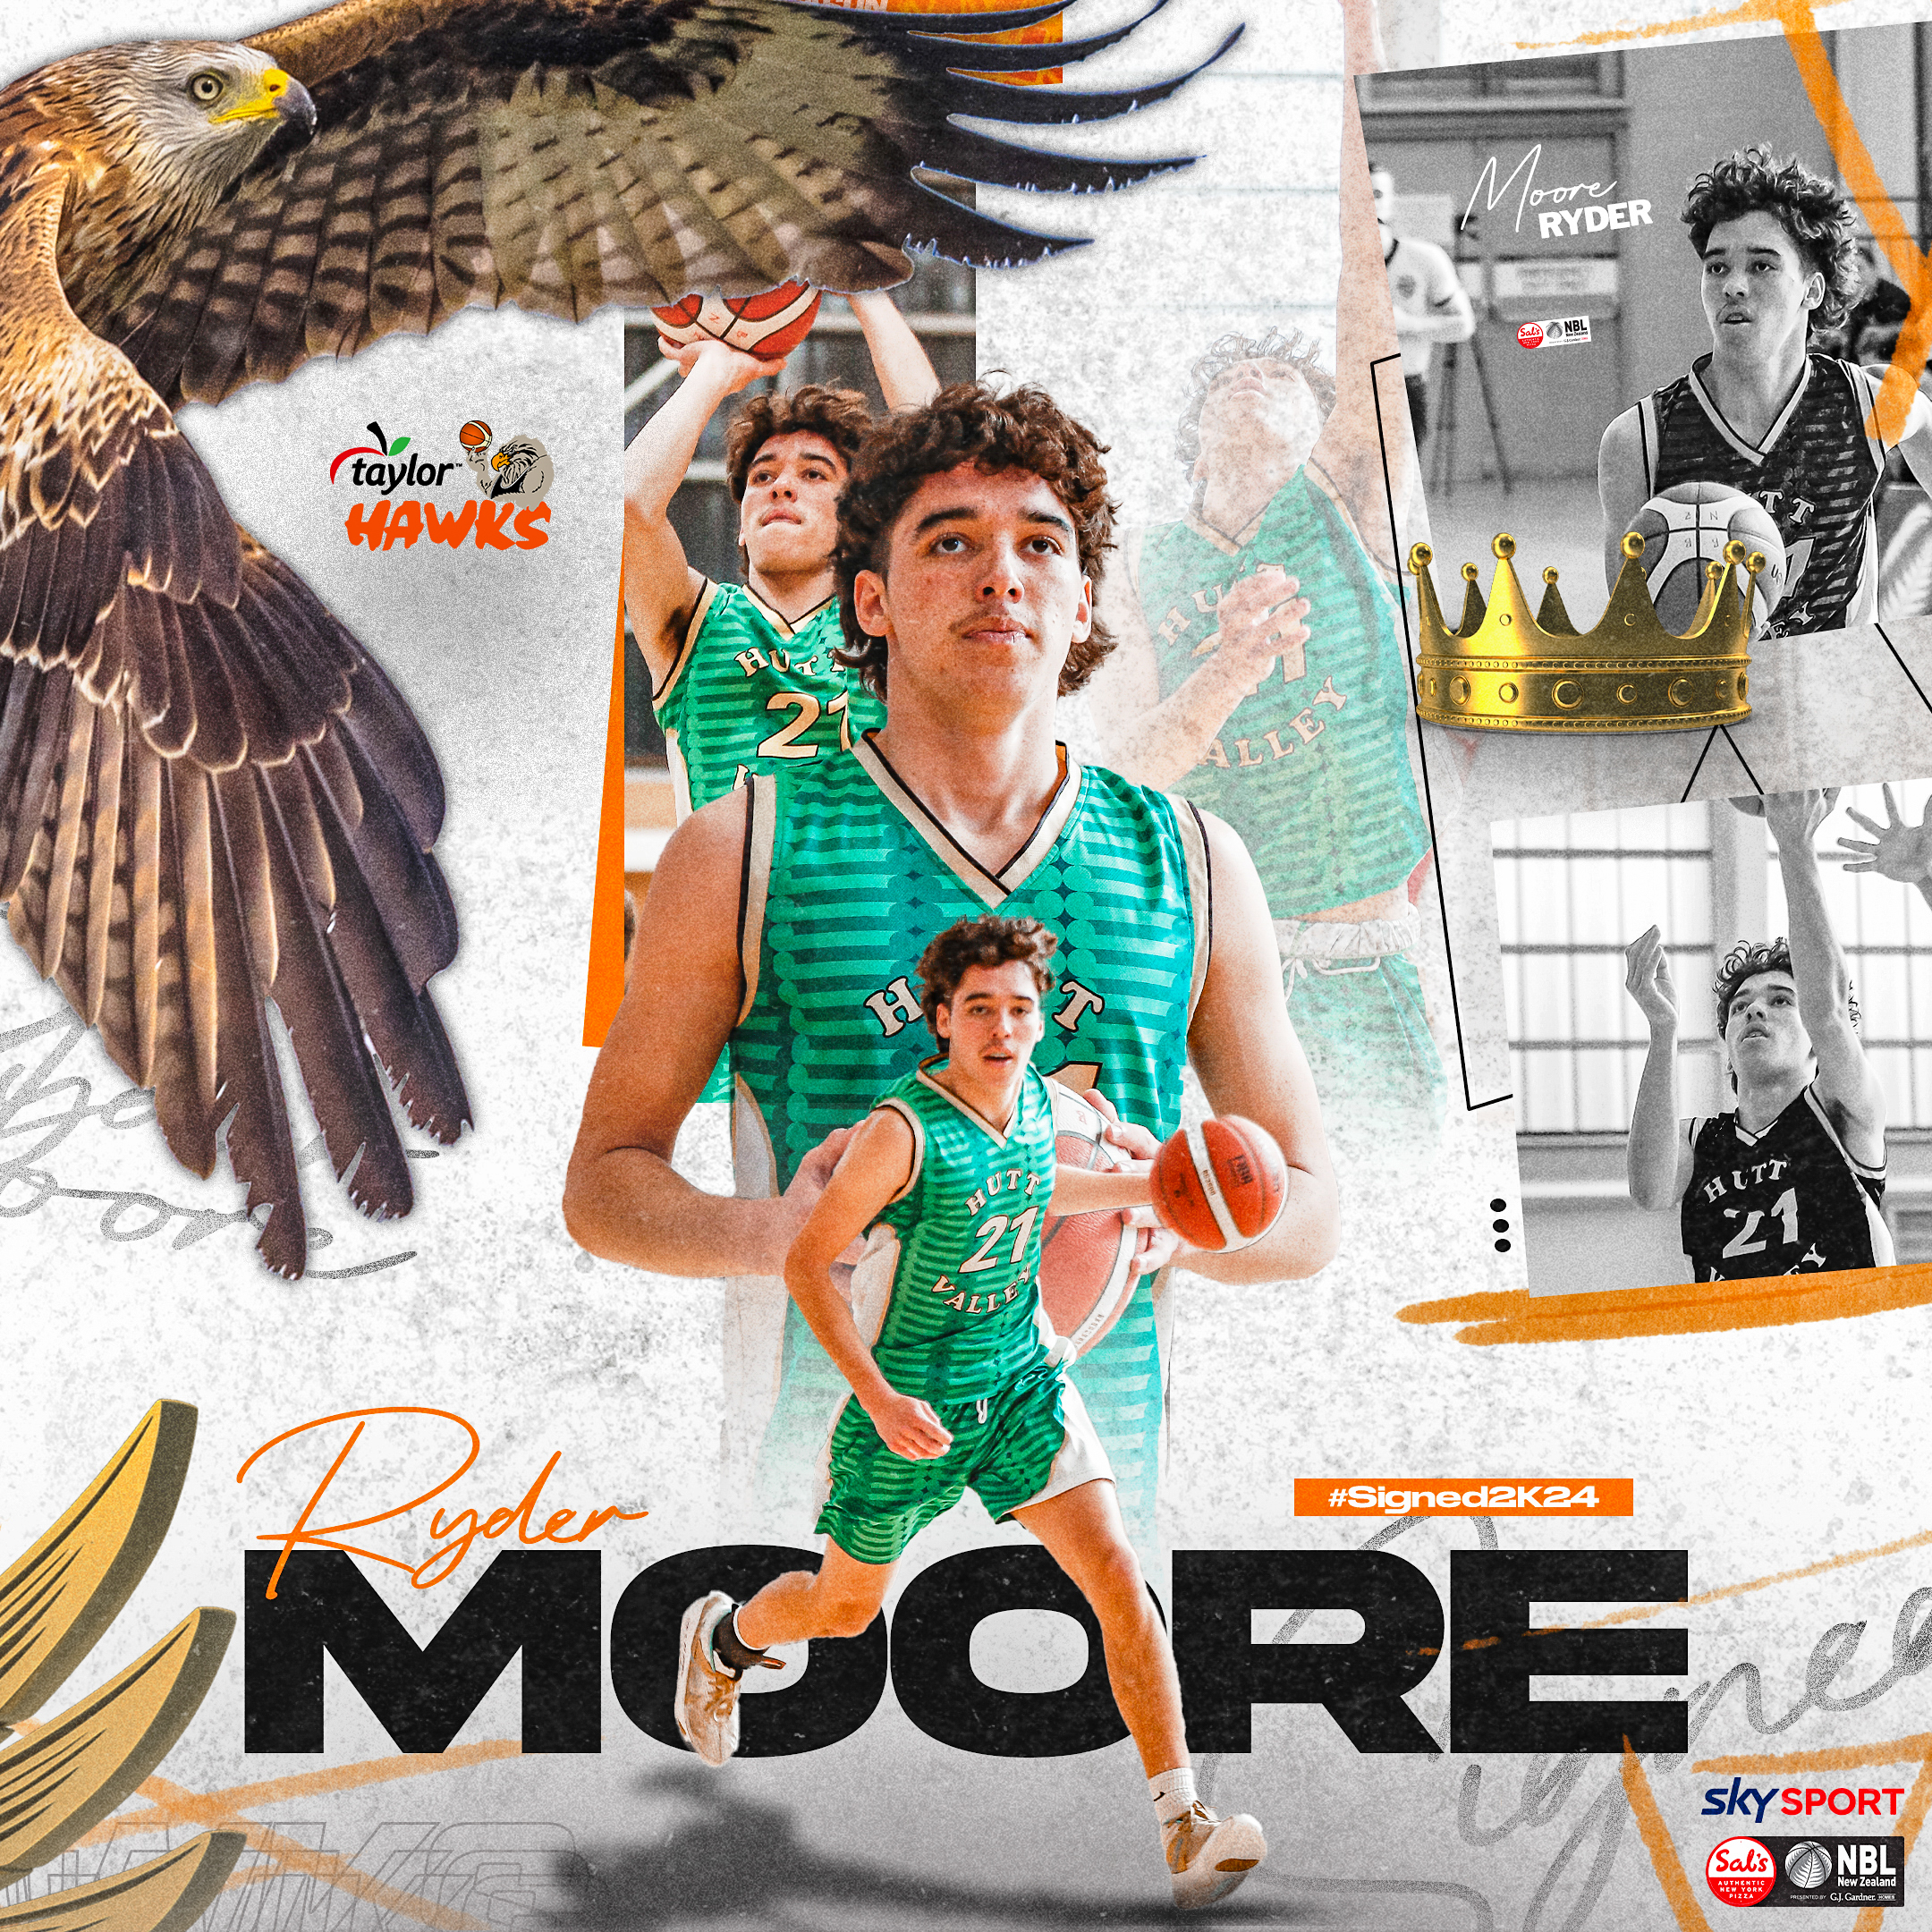 Moore local talent for the Hawks 